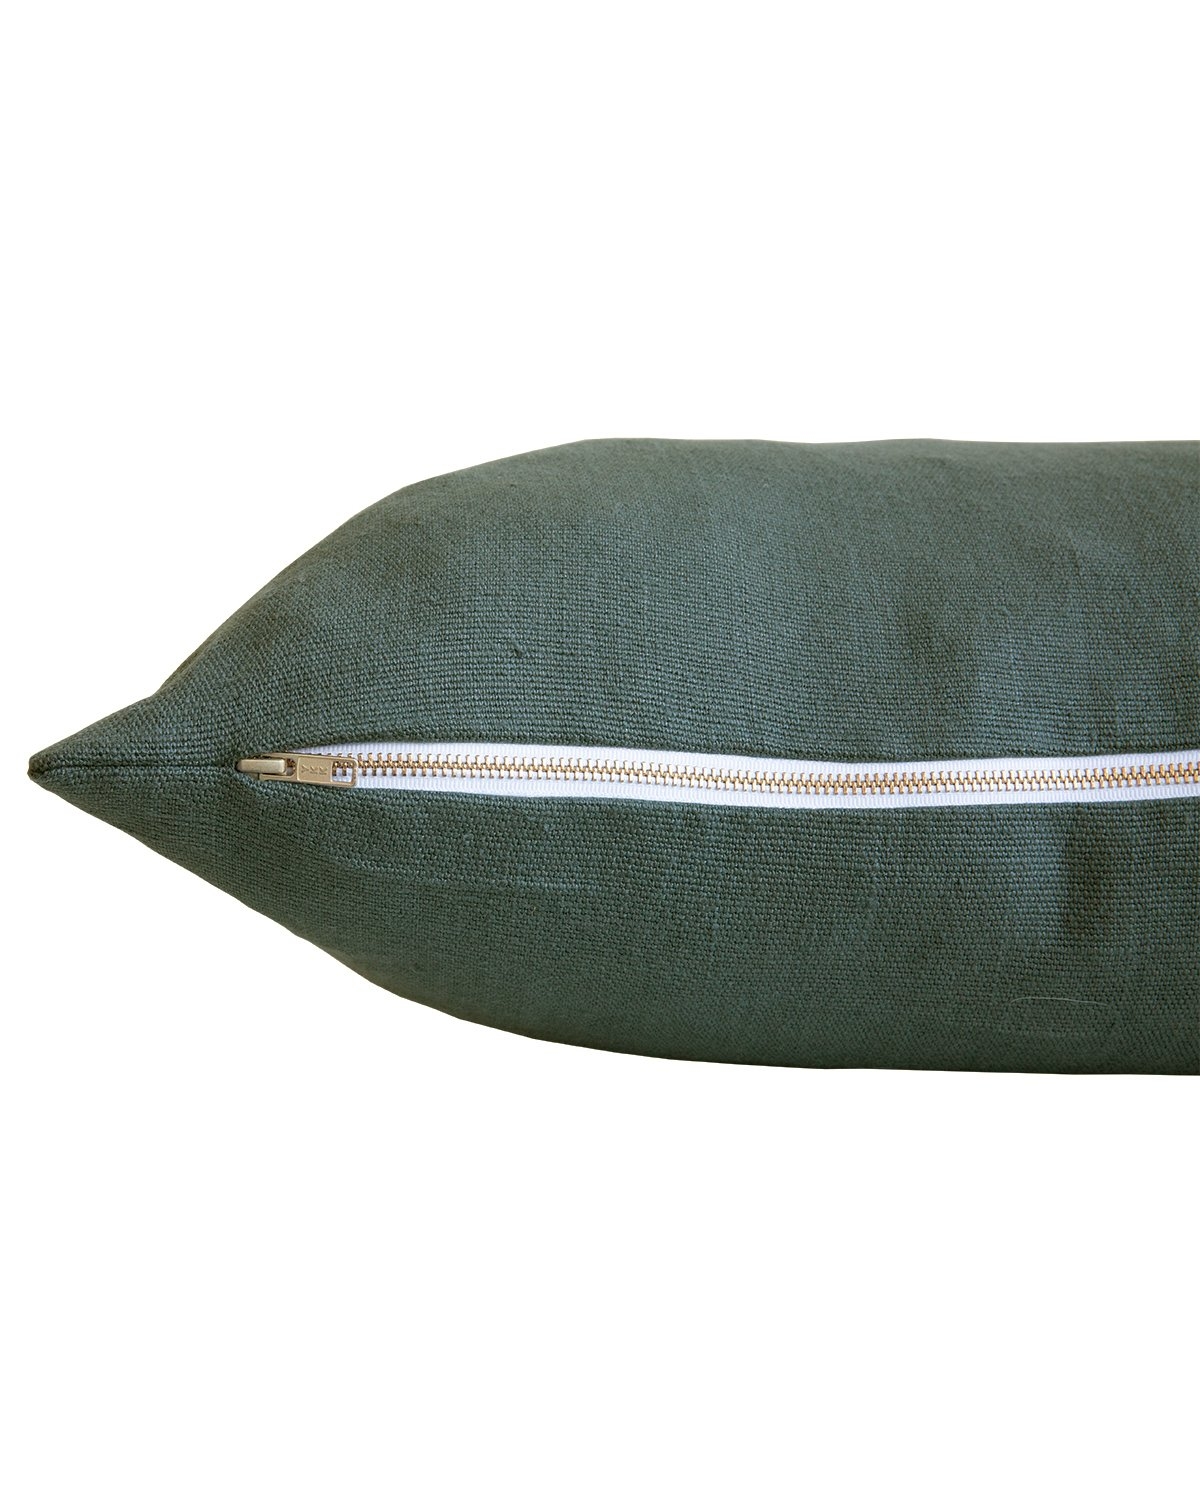 FOSTER PILLOW WITHOUT INSERT, 20" x 20" - Image 2